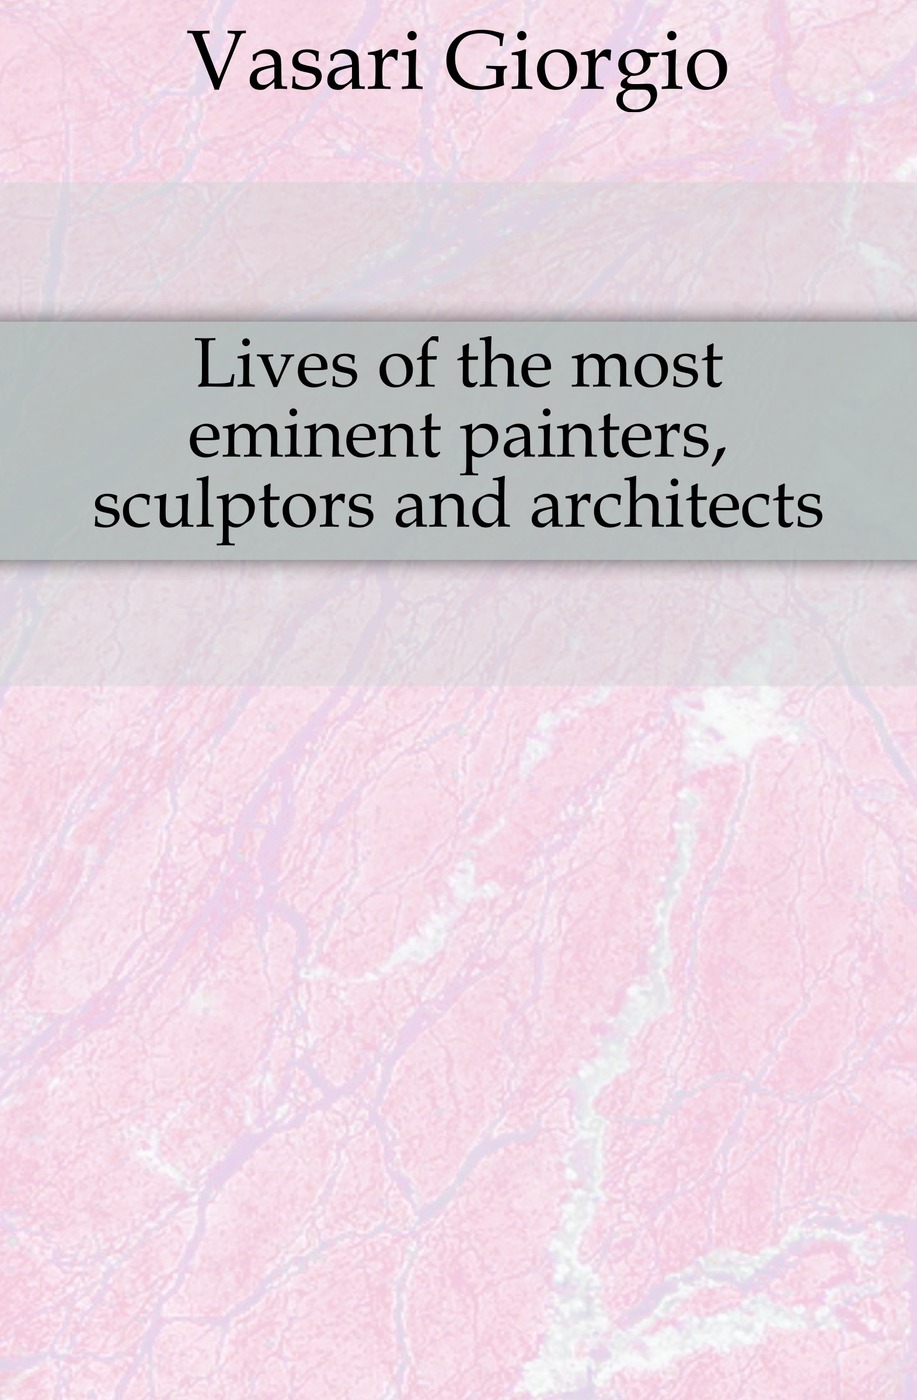 Lives of the most eminent painters, sculptors and architects